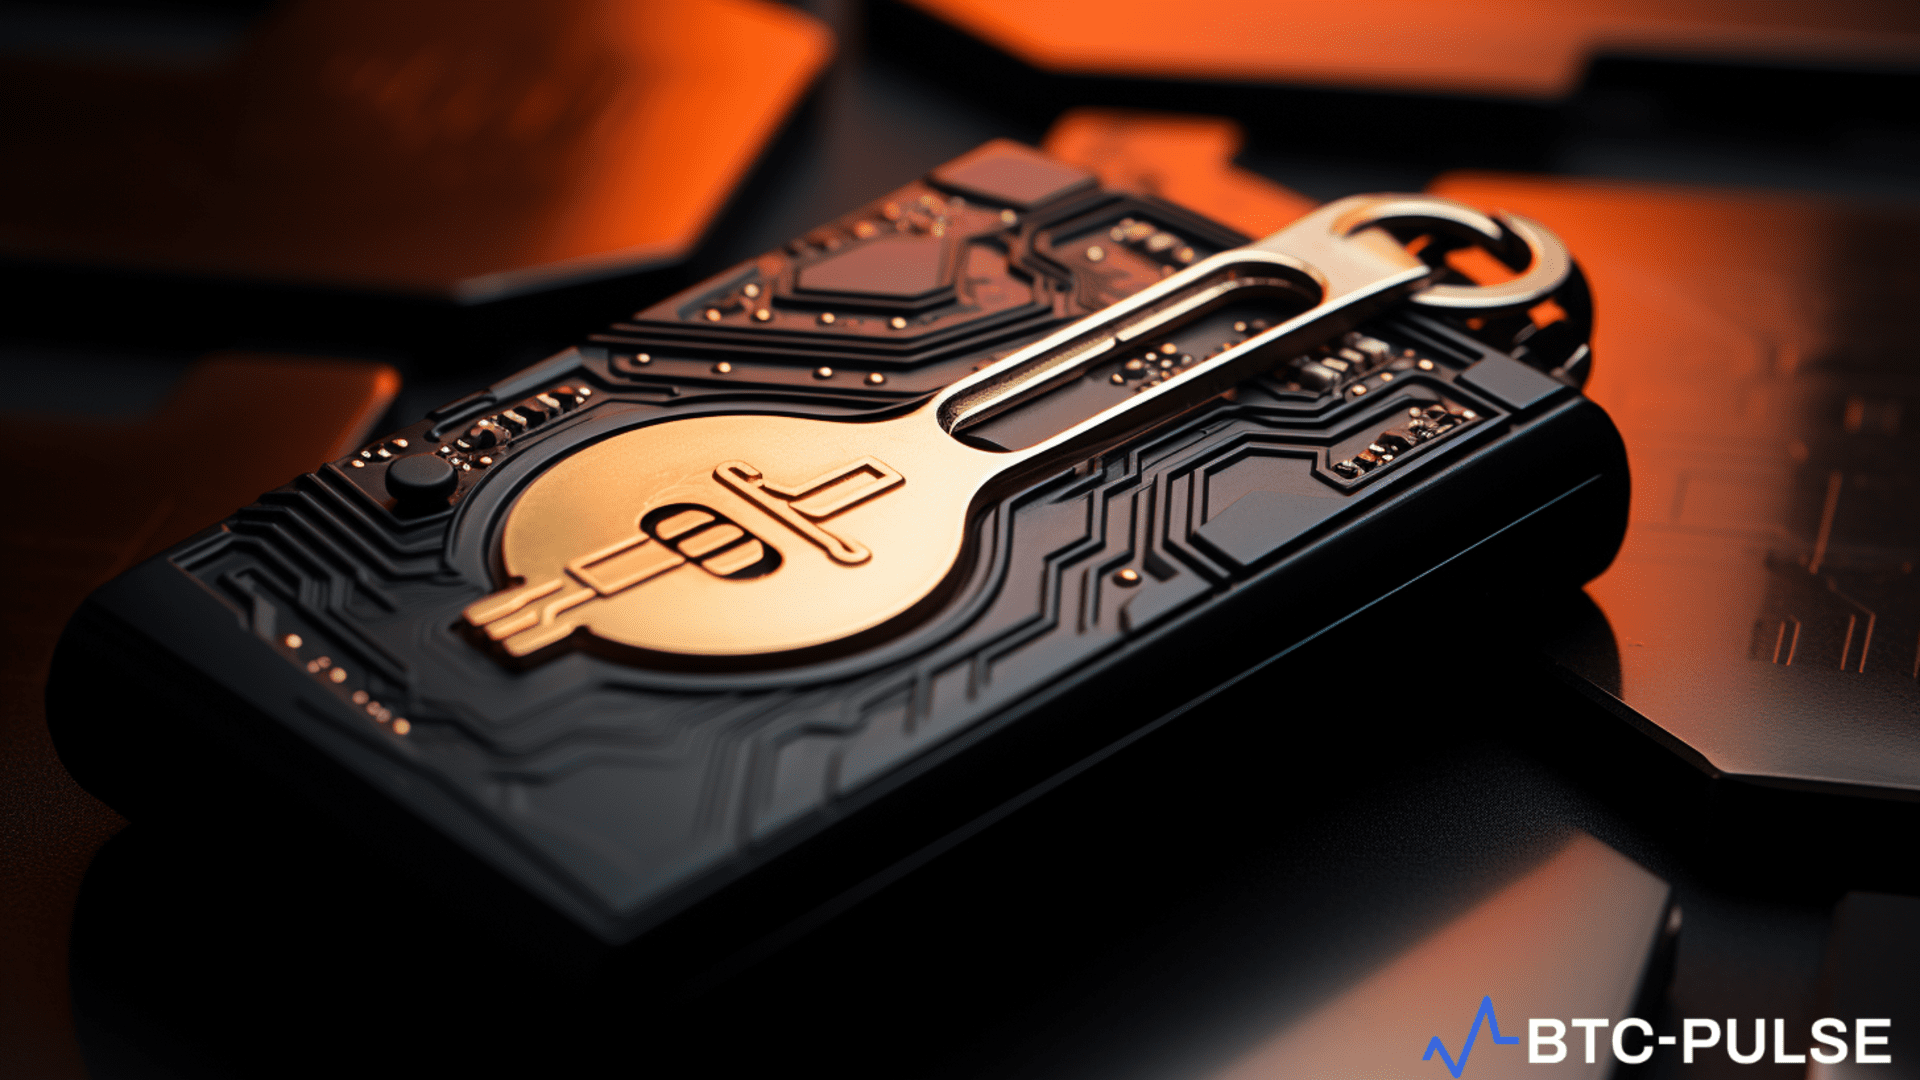 Hardware wallet displaying cryptographic security key. Singapore Police issue cybersecurity warning, advocating for enhanced protection against crypto drainers in the evolving digital landscape.